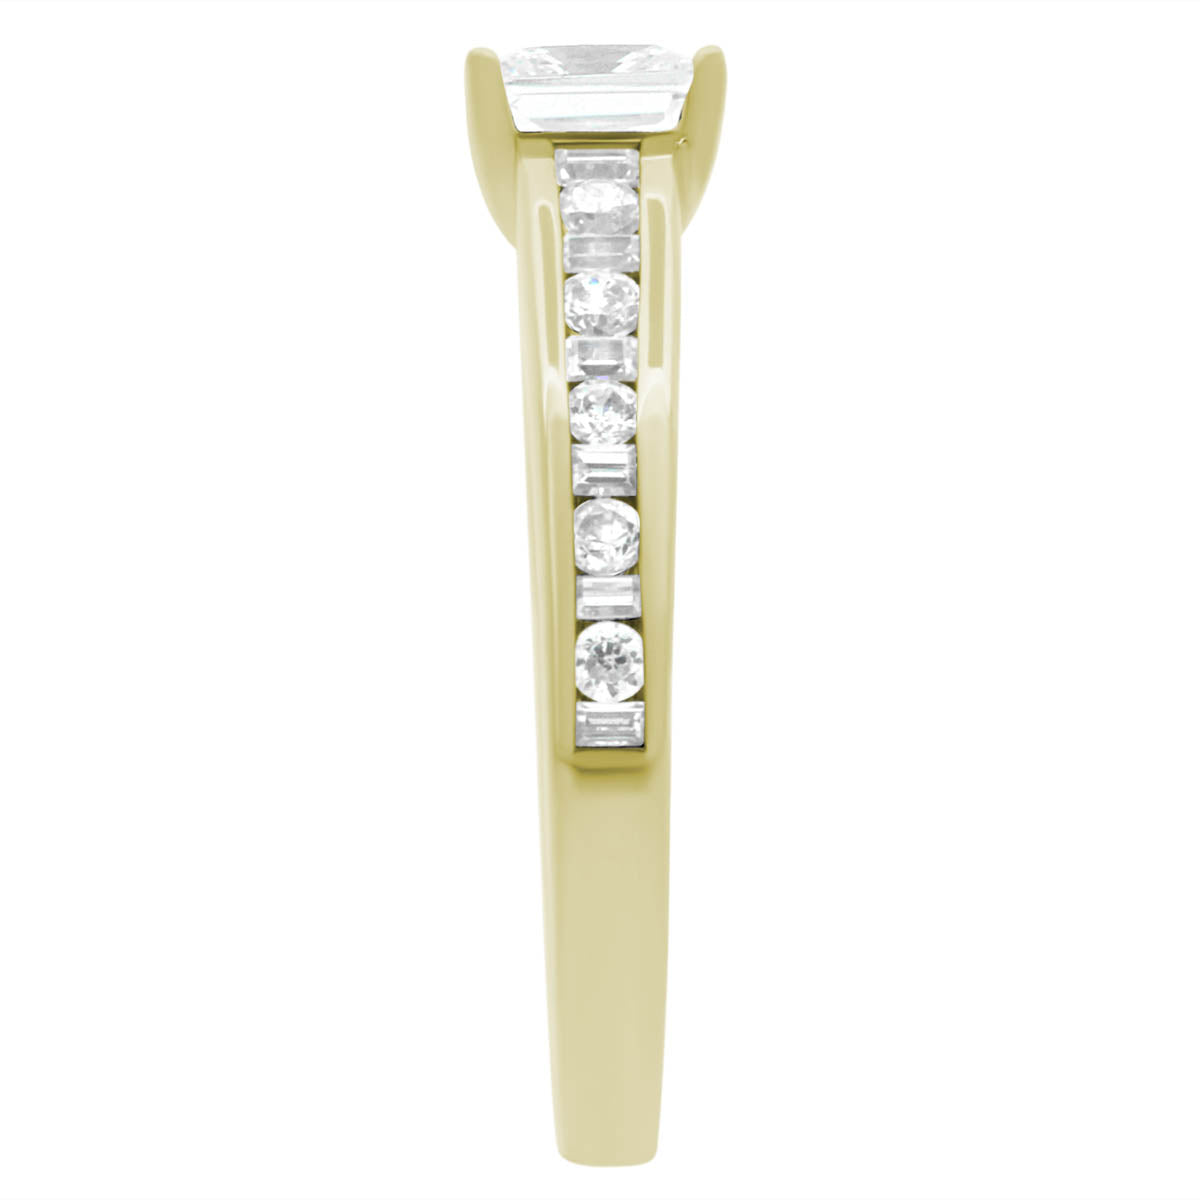 Fancy Cut Diamond Ring made from yellow gold standing upright and pictured from the side